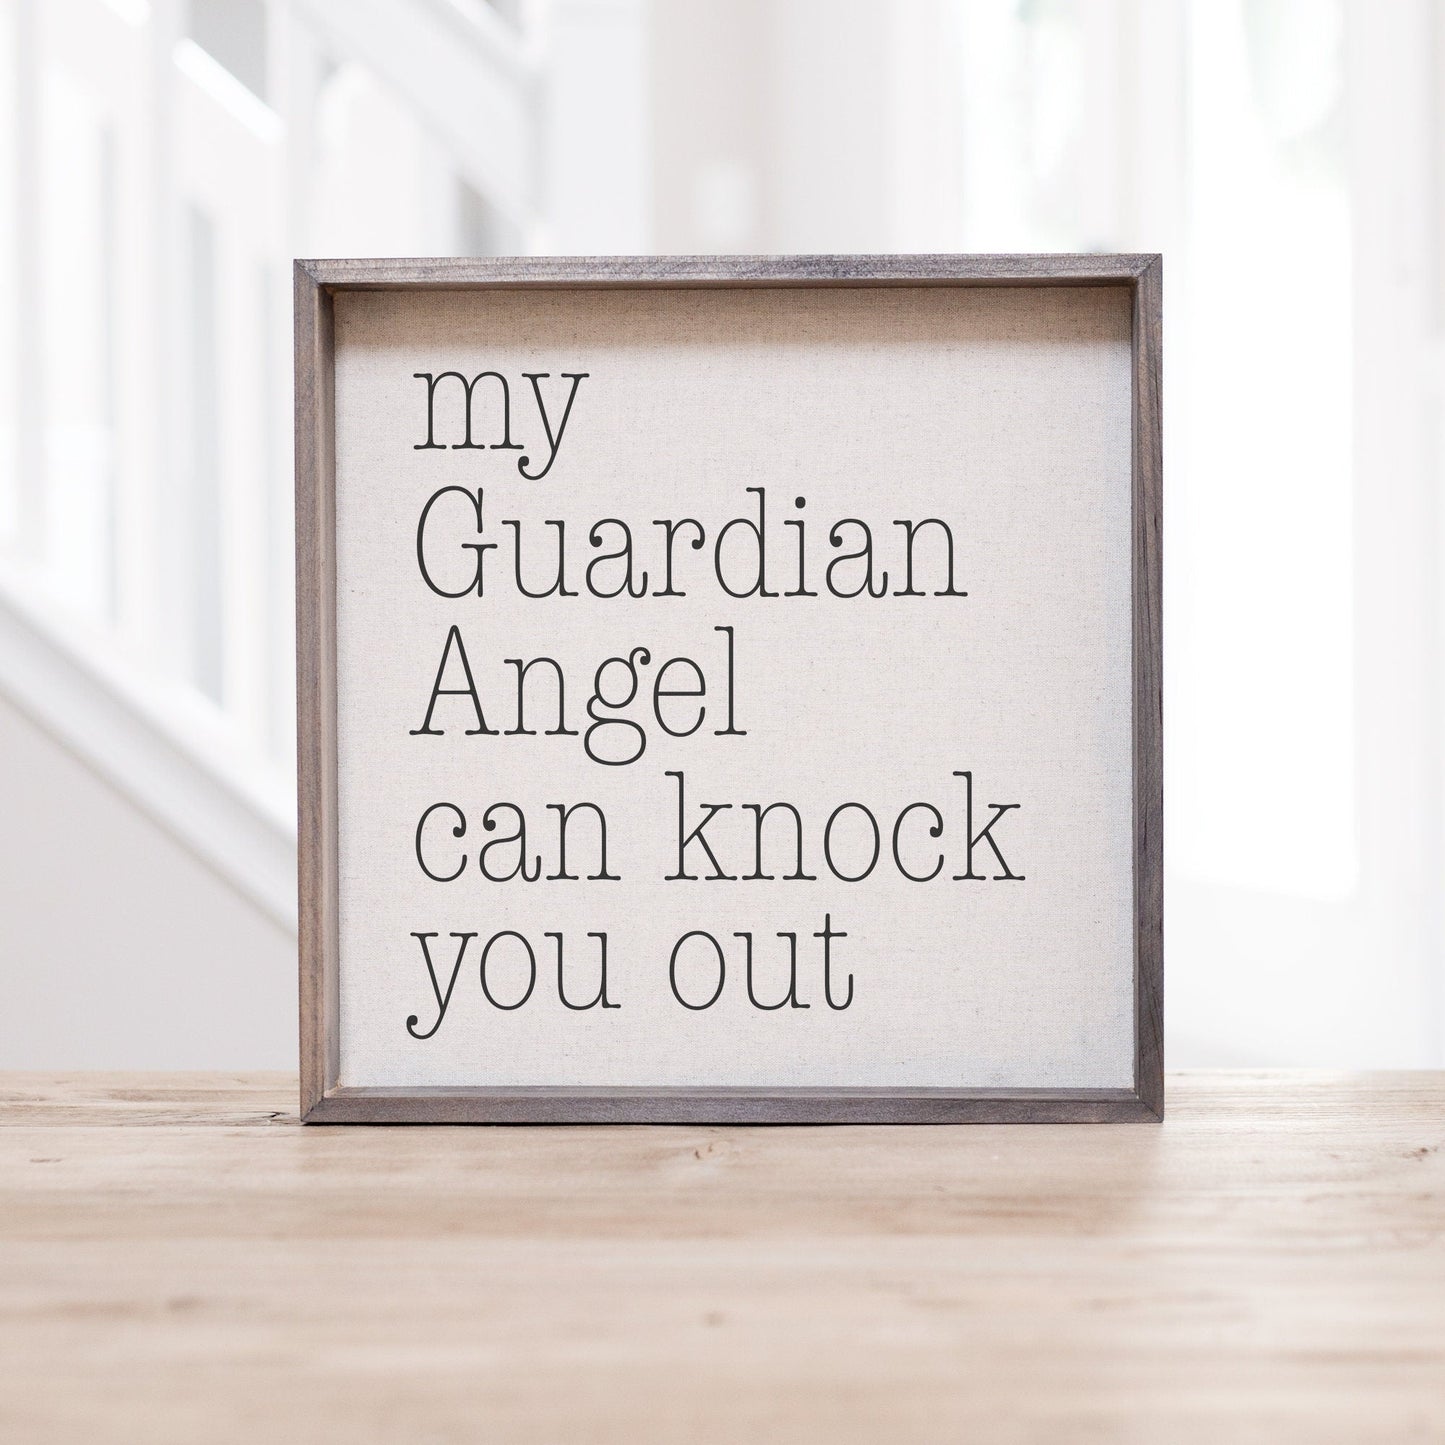 Load image into Gallery viewer, My Guardian Angel Can Knock You Out Nursery Sign | Nursery Decor | Customizable Sign | Gift for New Mom | Baby Shower Gift | Shower Decor
